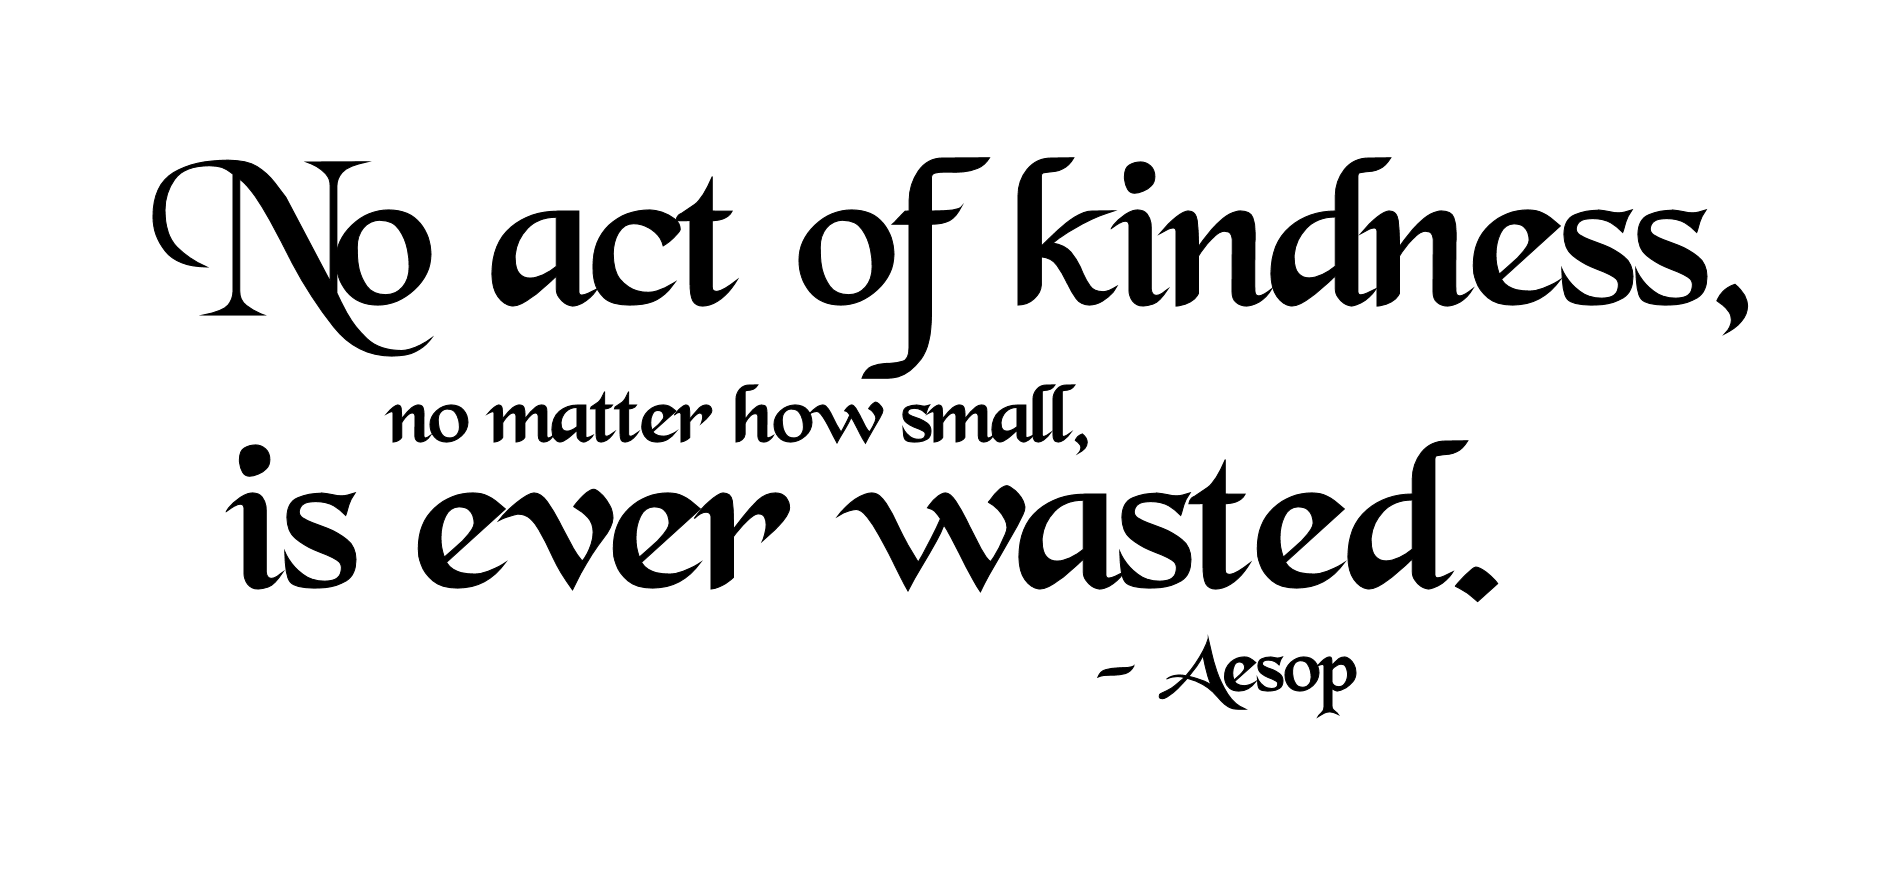 No act of kindness is ever wasted